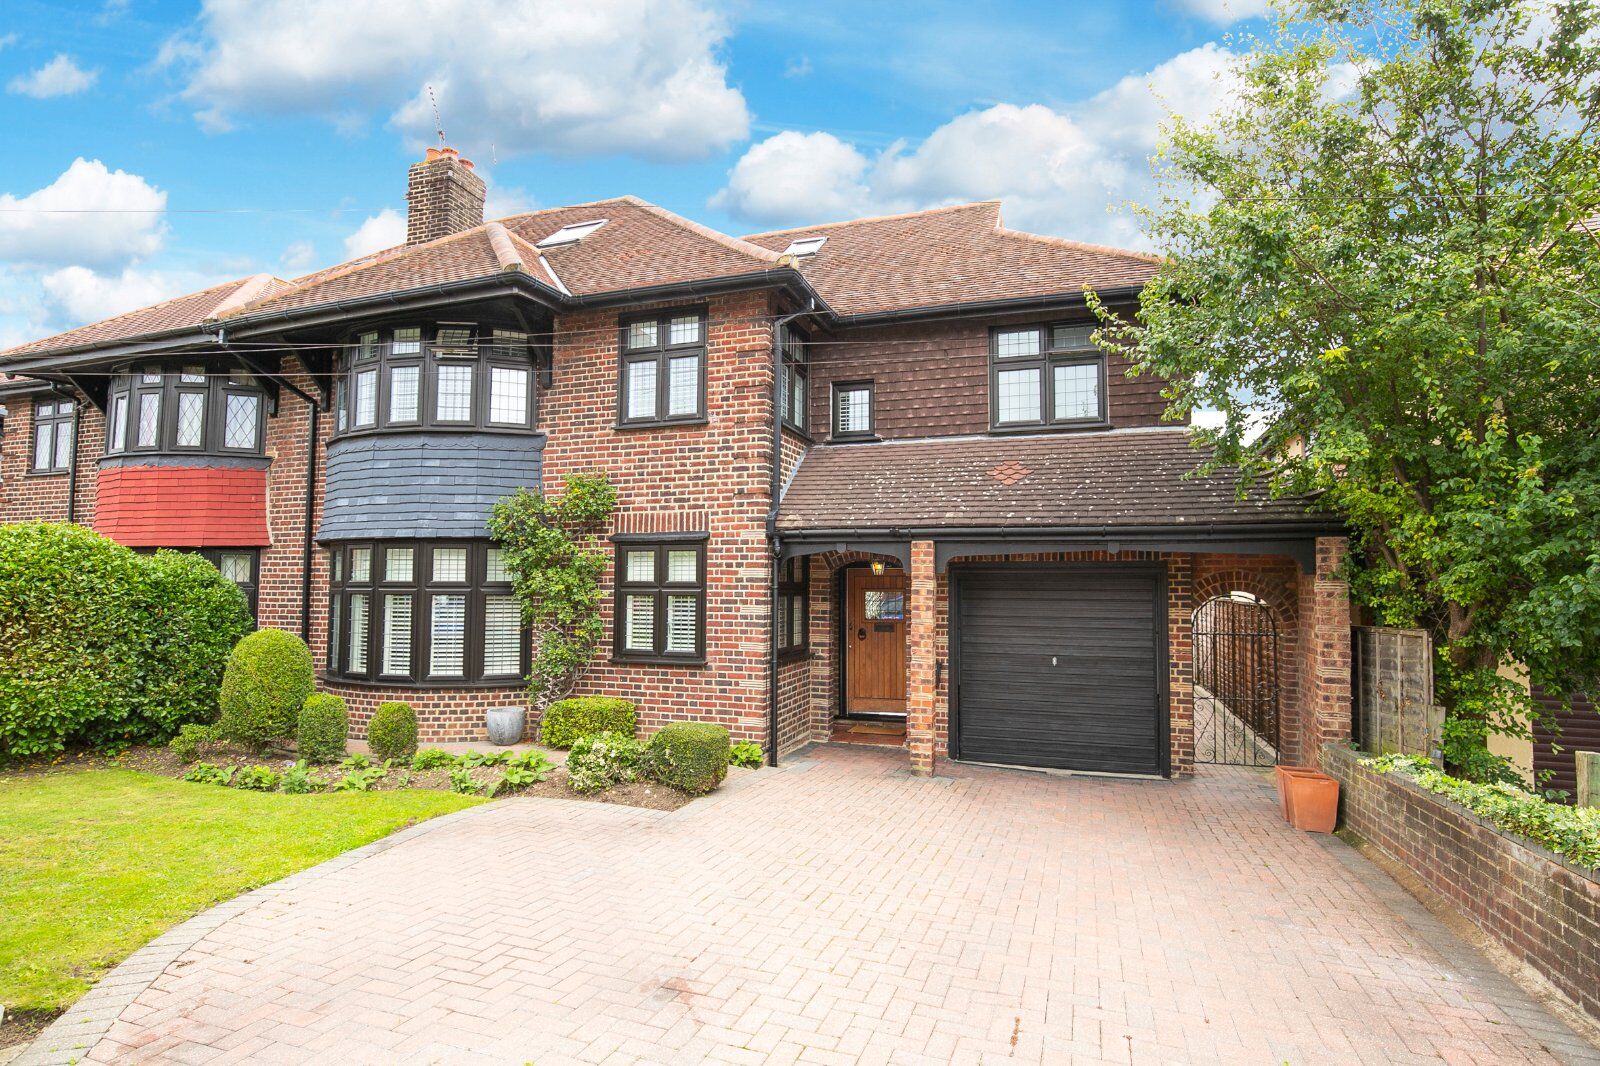 4 bedroom semi detached house for sale Mount Pleasant Road, Chigwell, IG7, main image